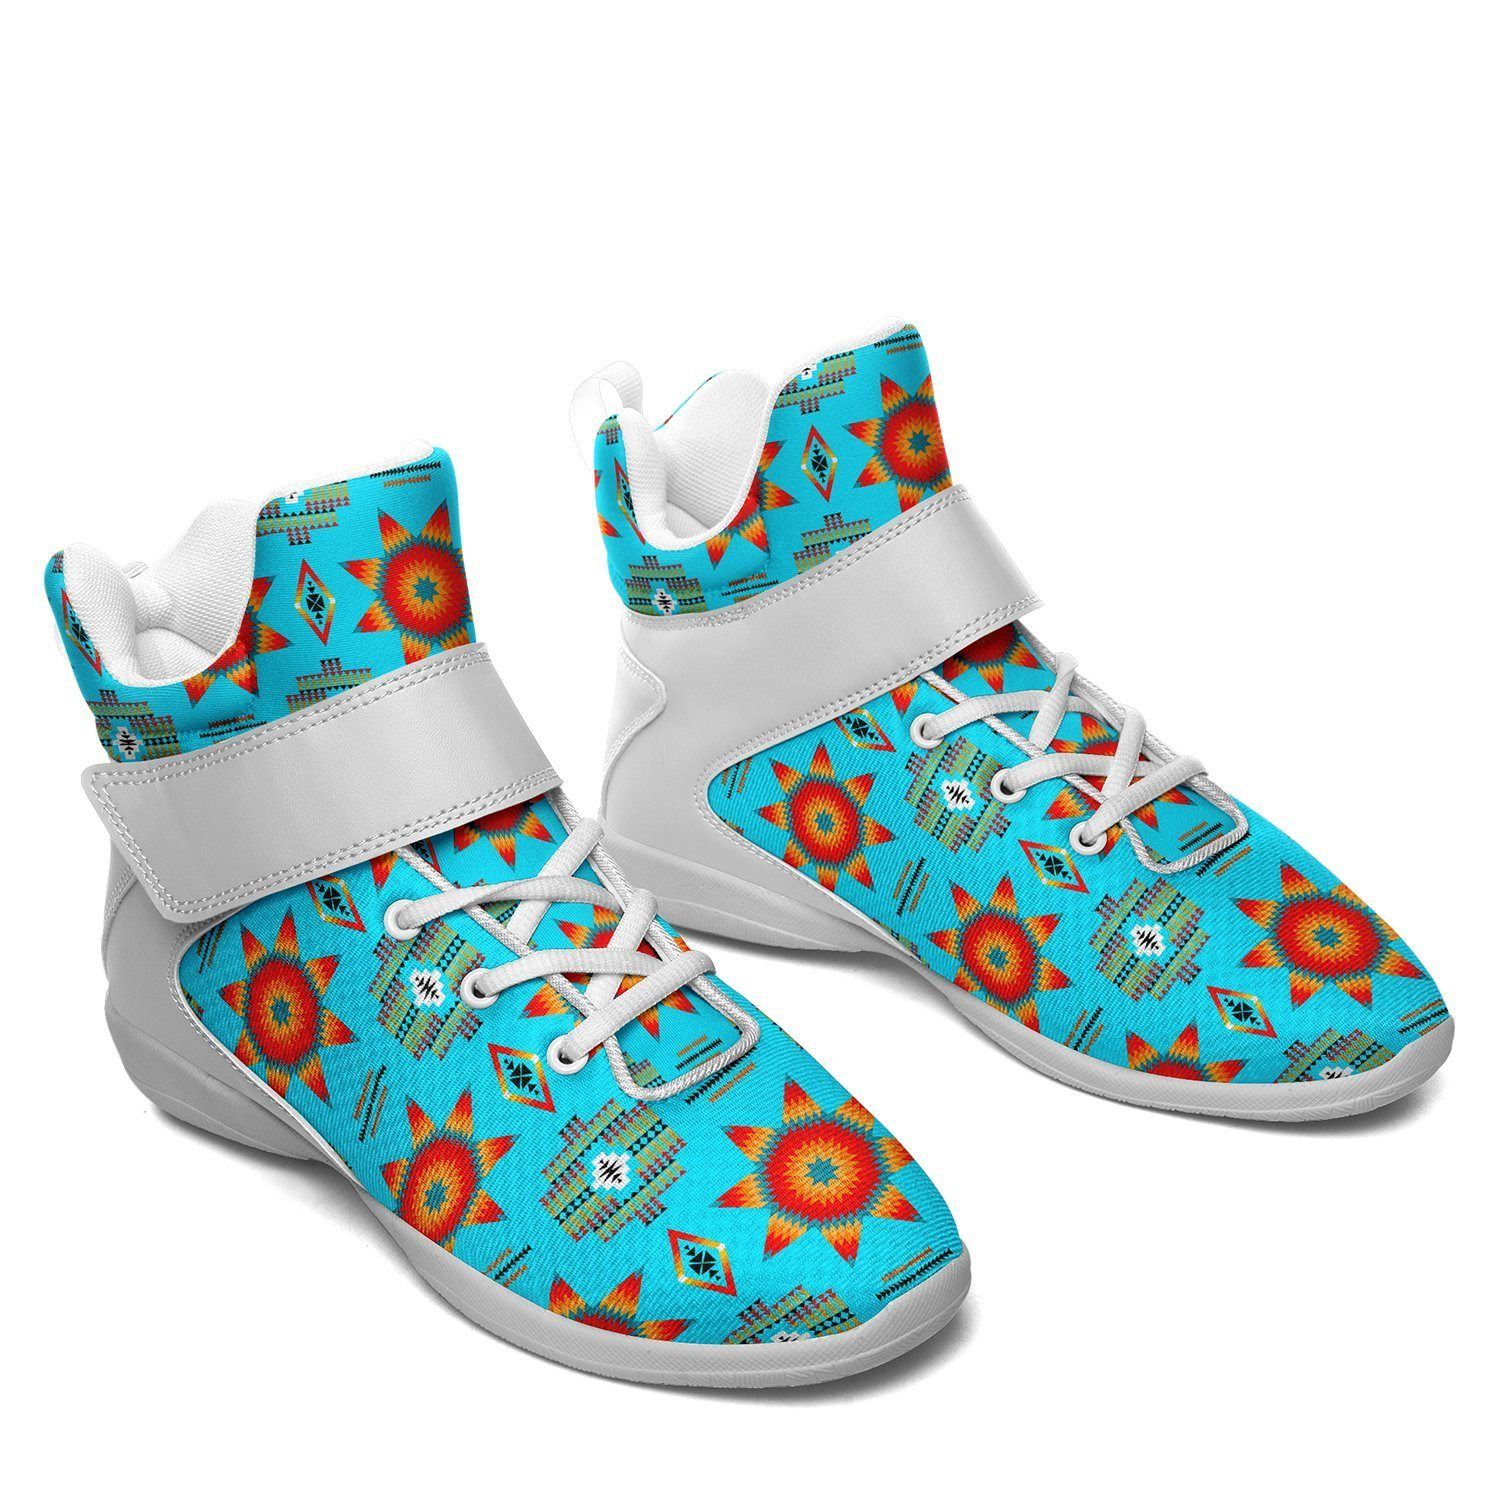 Rising Star Harvest Moon Ipottaa Basketball / Sport High Top Shoes - White Sole 49 Dzine 